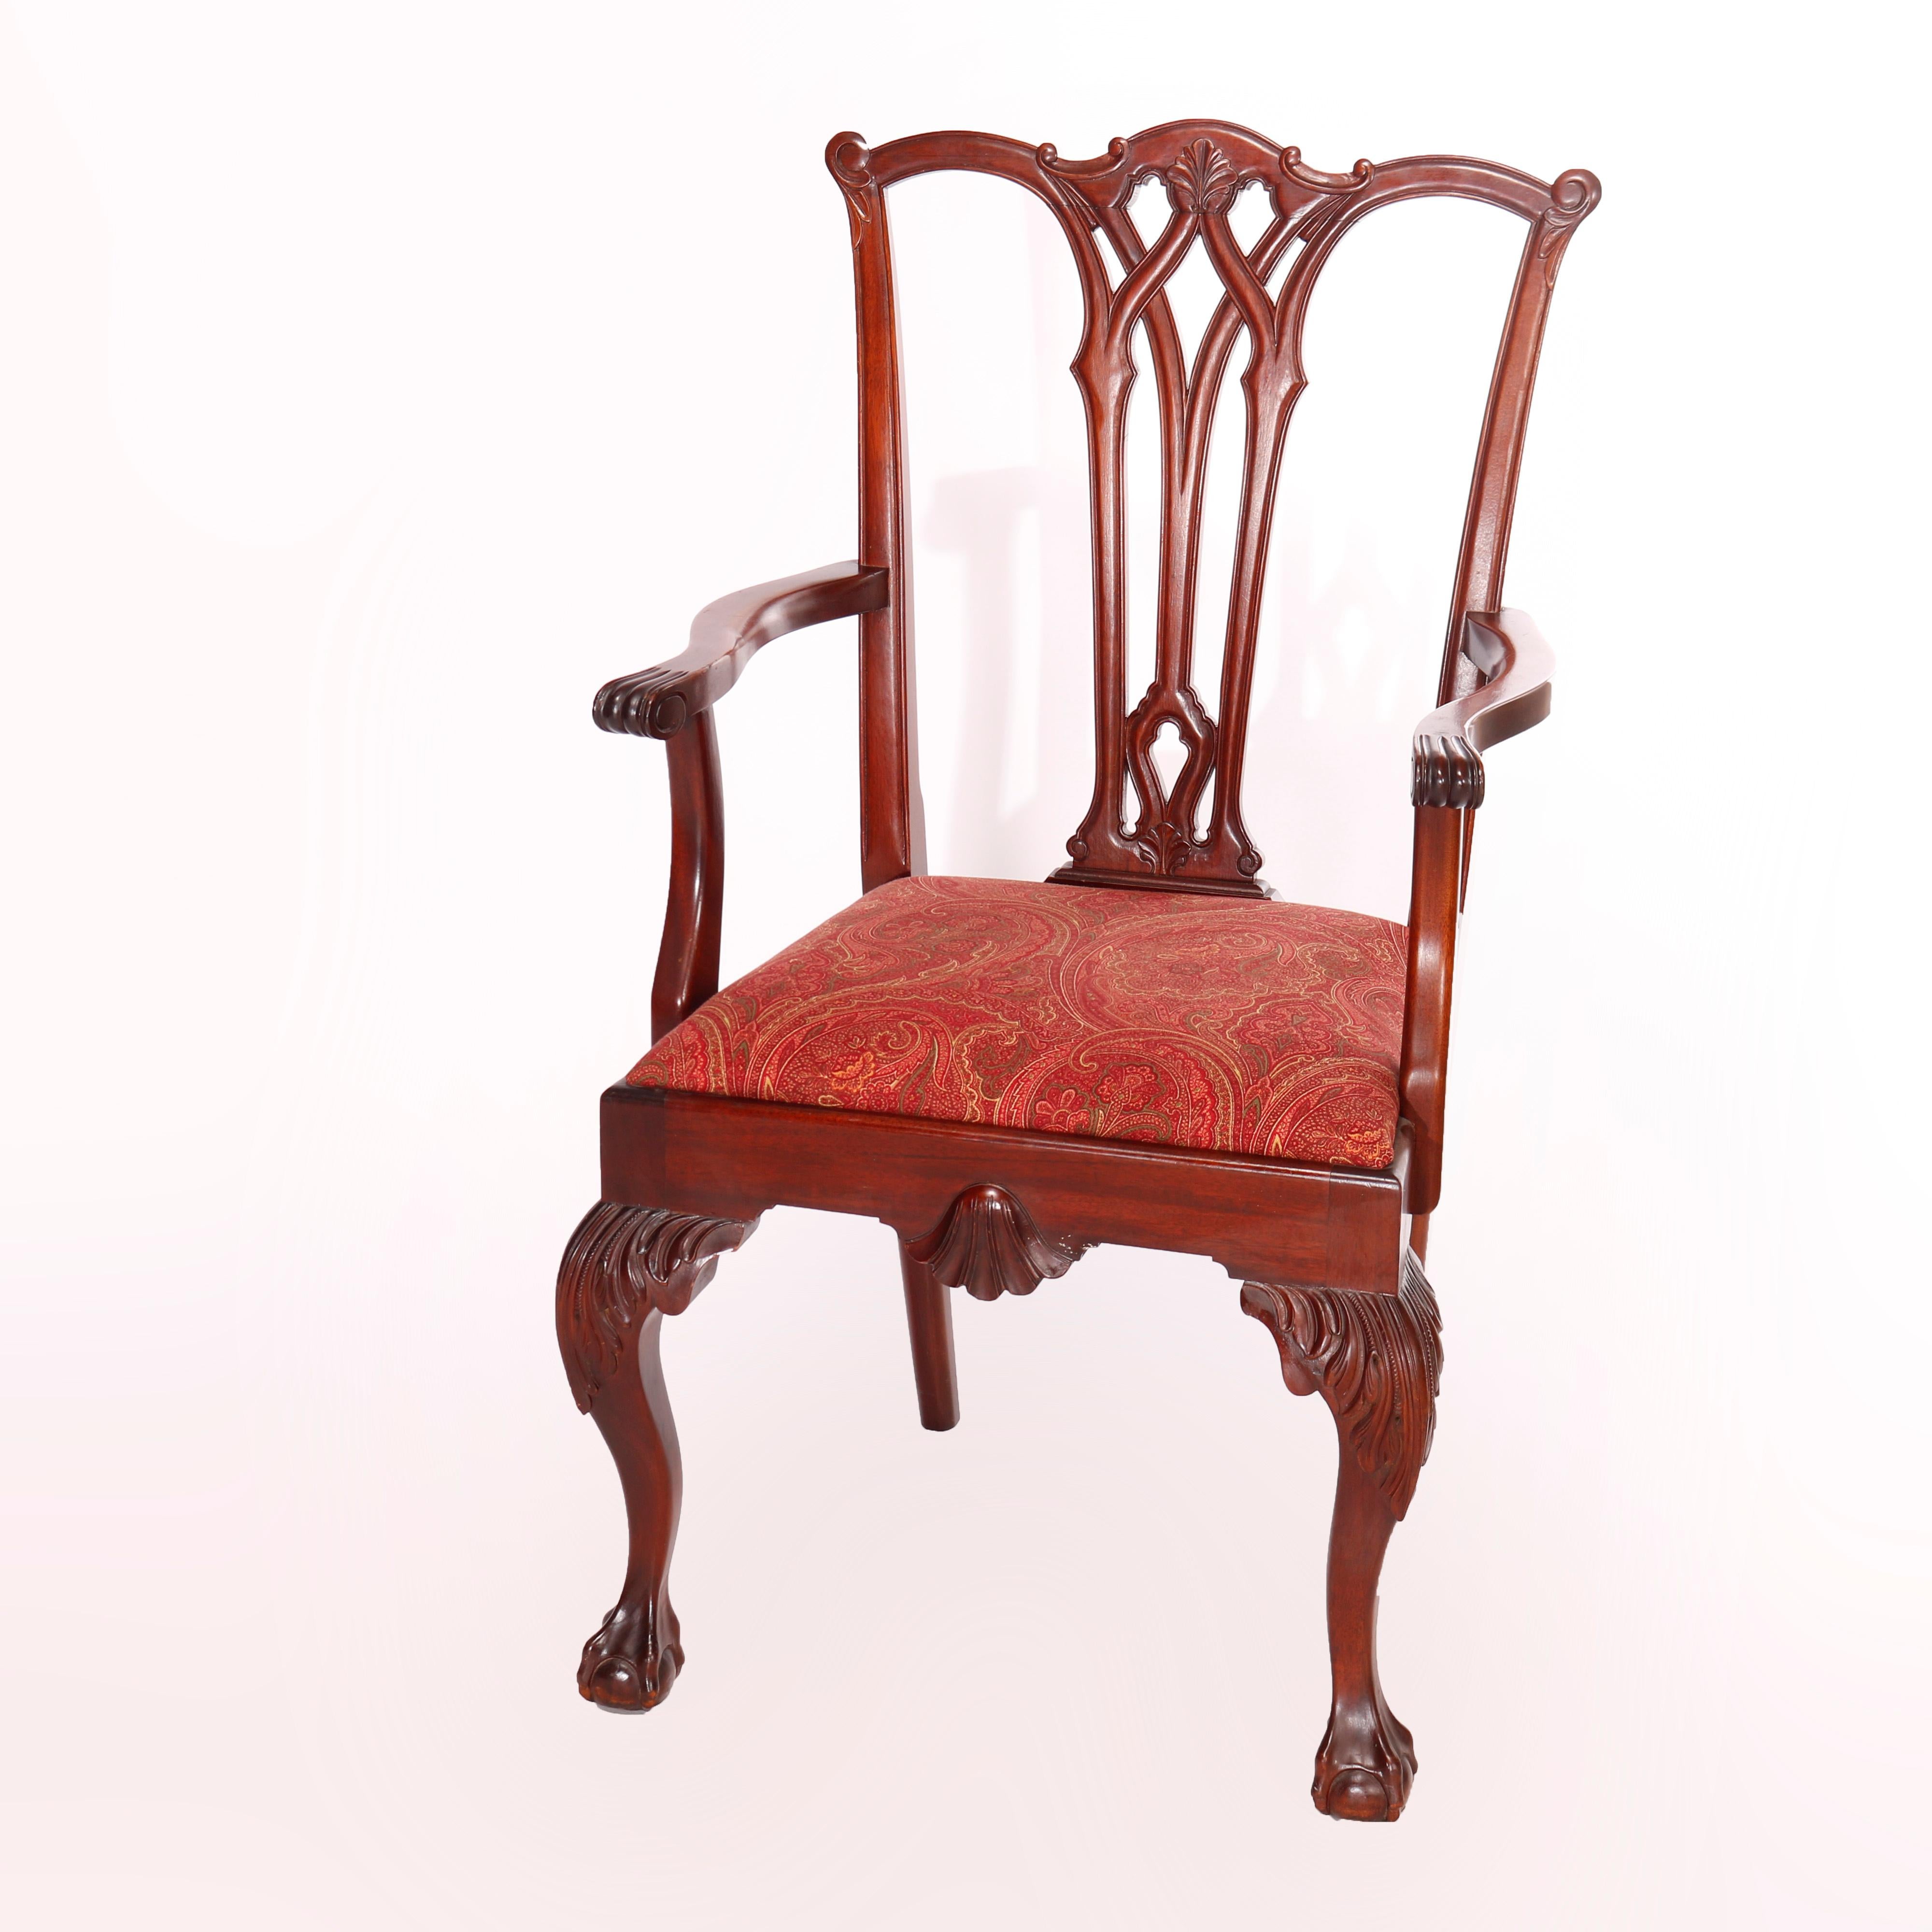 chippendale style dining chairs